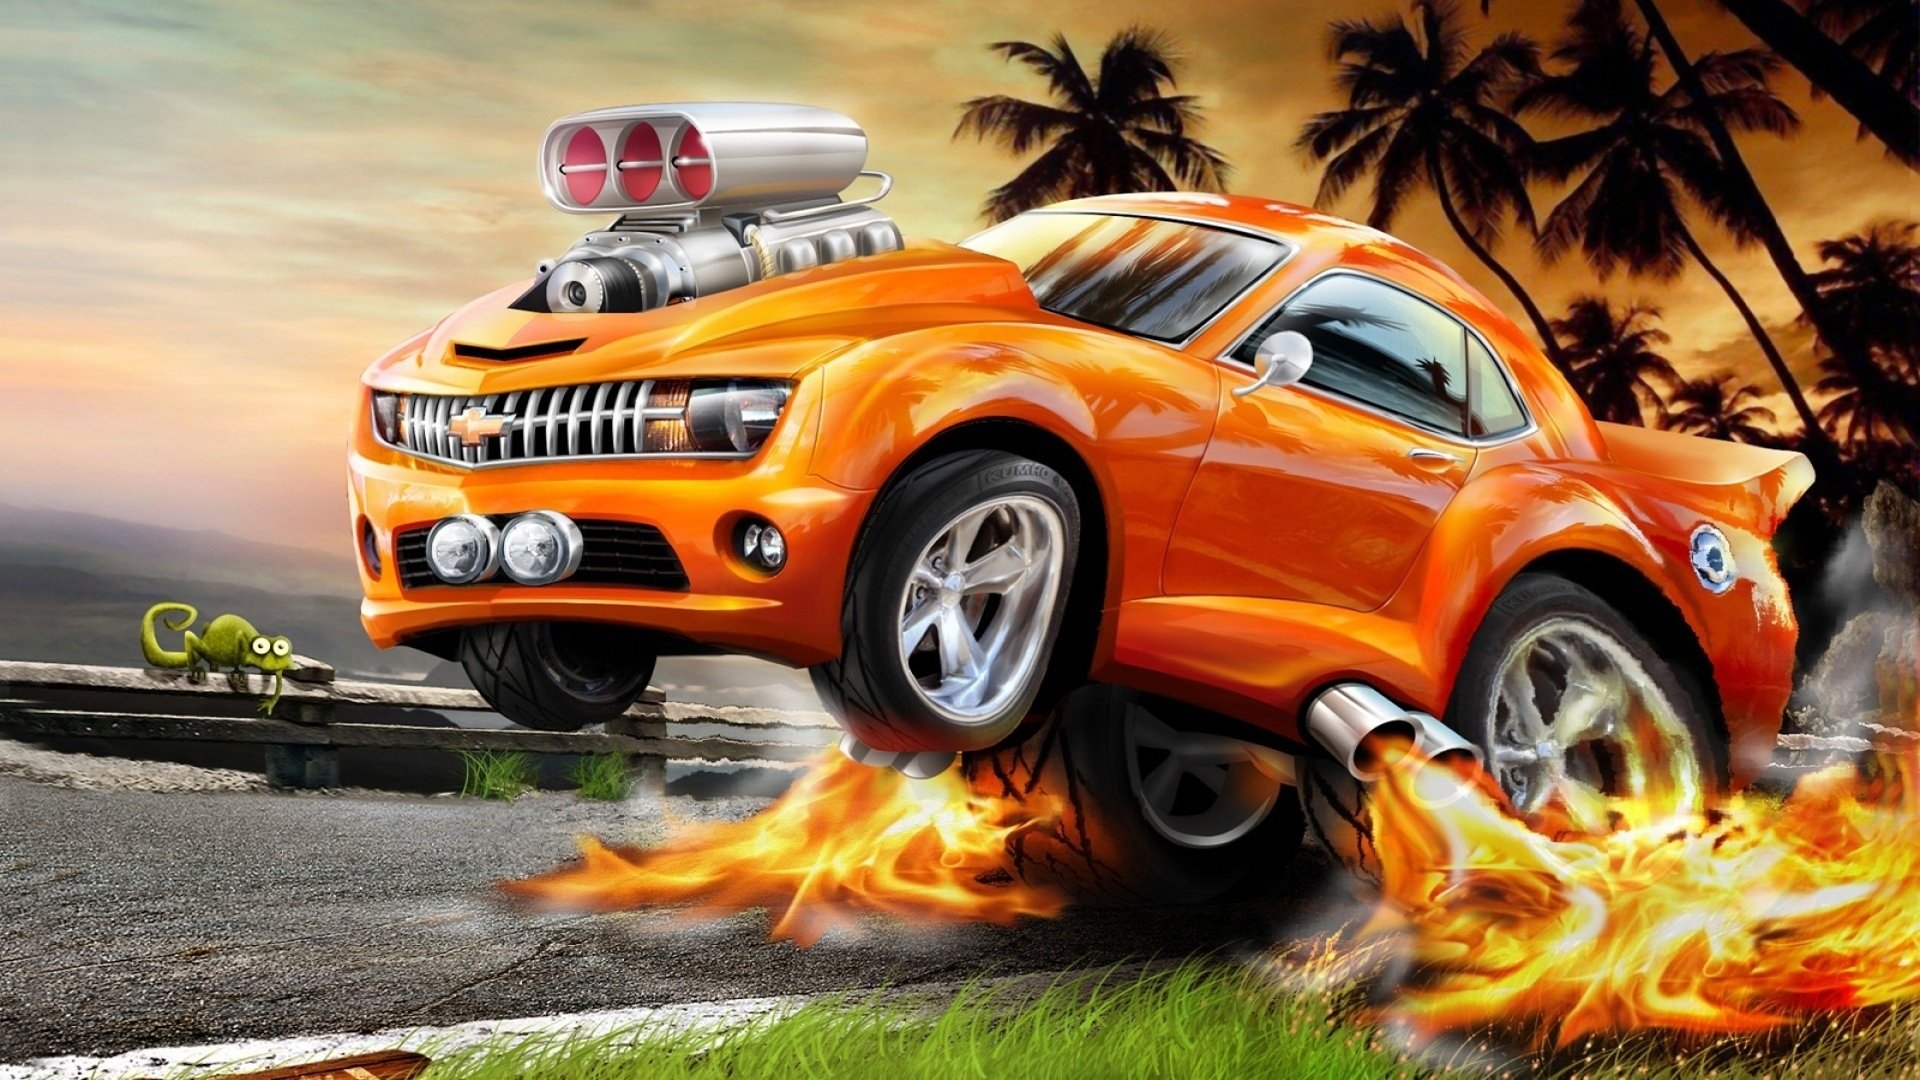 Hot Wheels HD Wallpapers and Backgrounds.